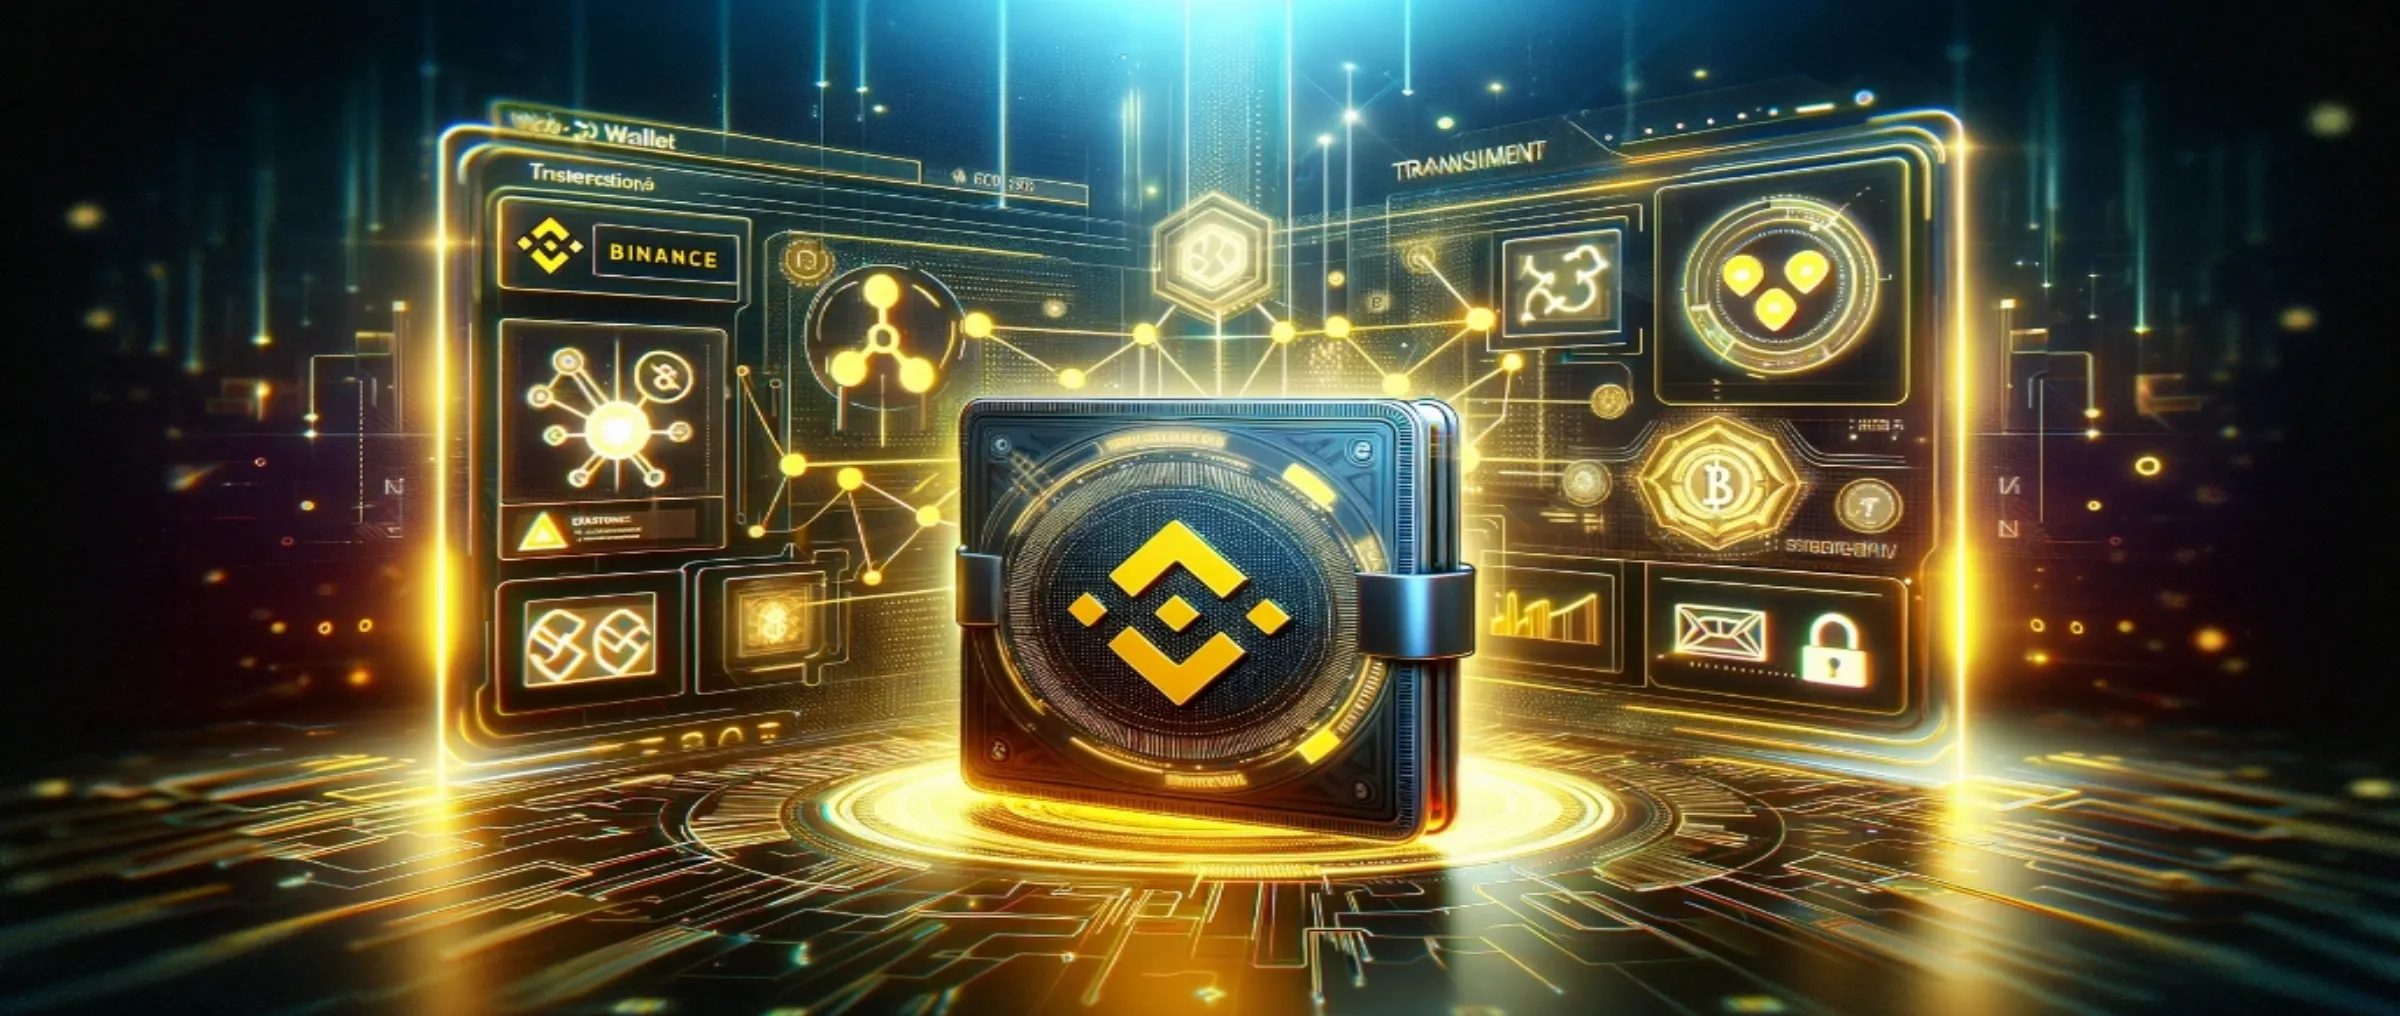 Binance Exchange has integrated the Solana network into its Web3 Wallet